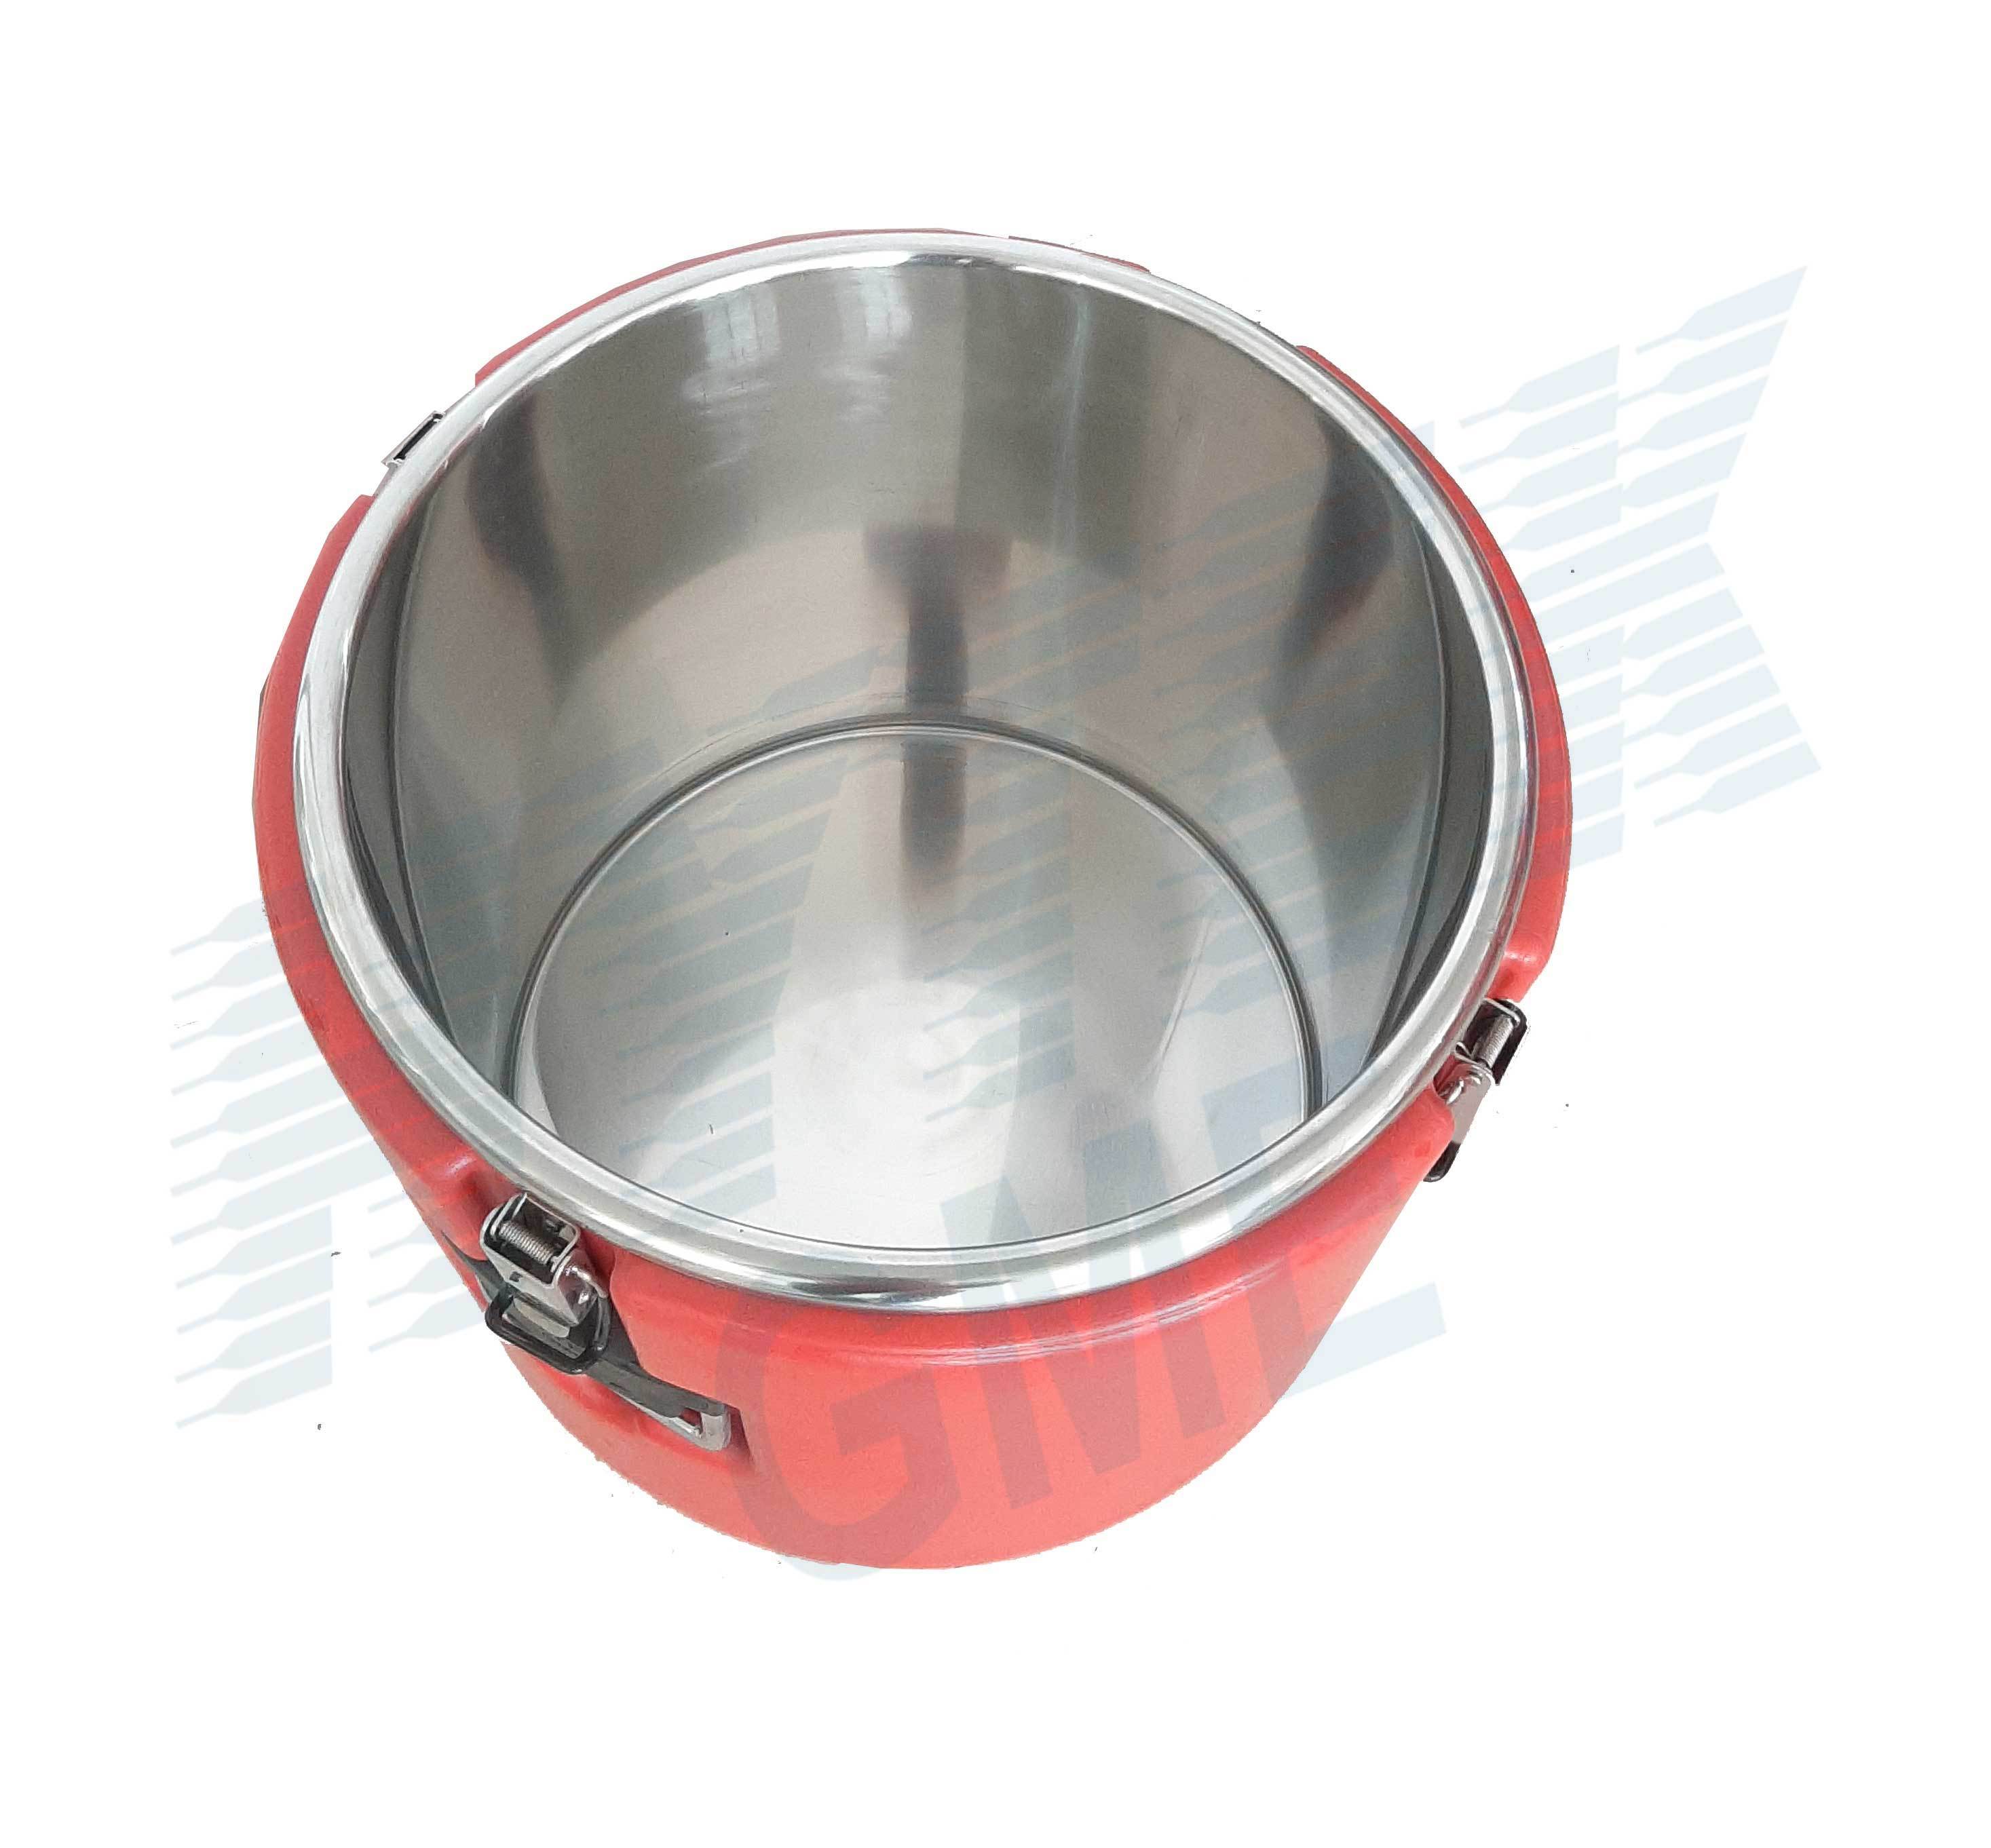 Insulated Food Container (Round, 32 Ltr.)